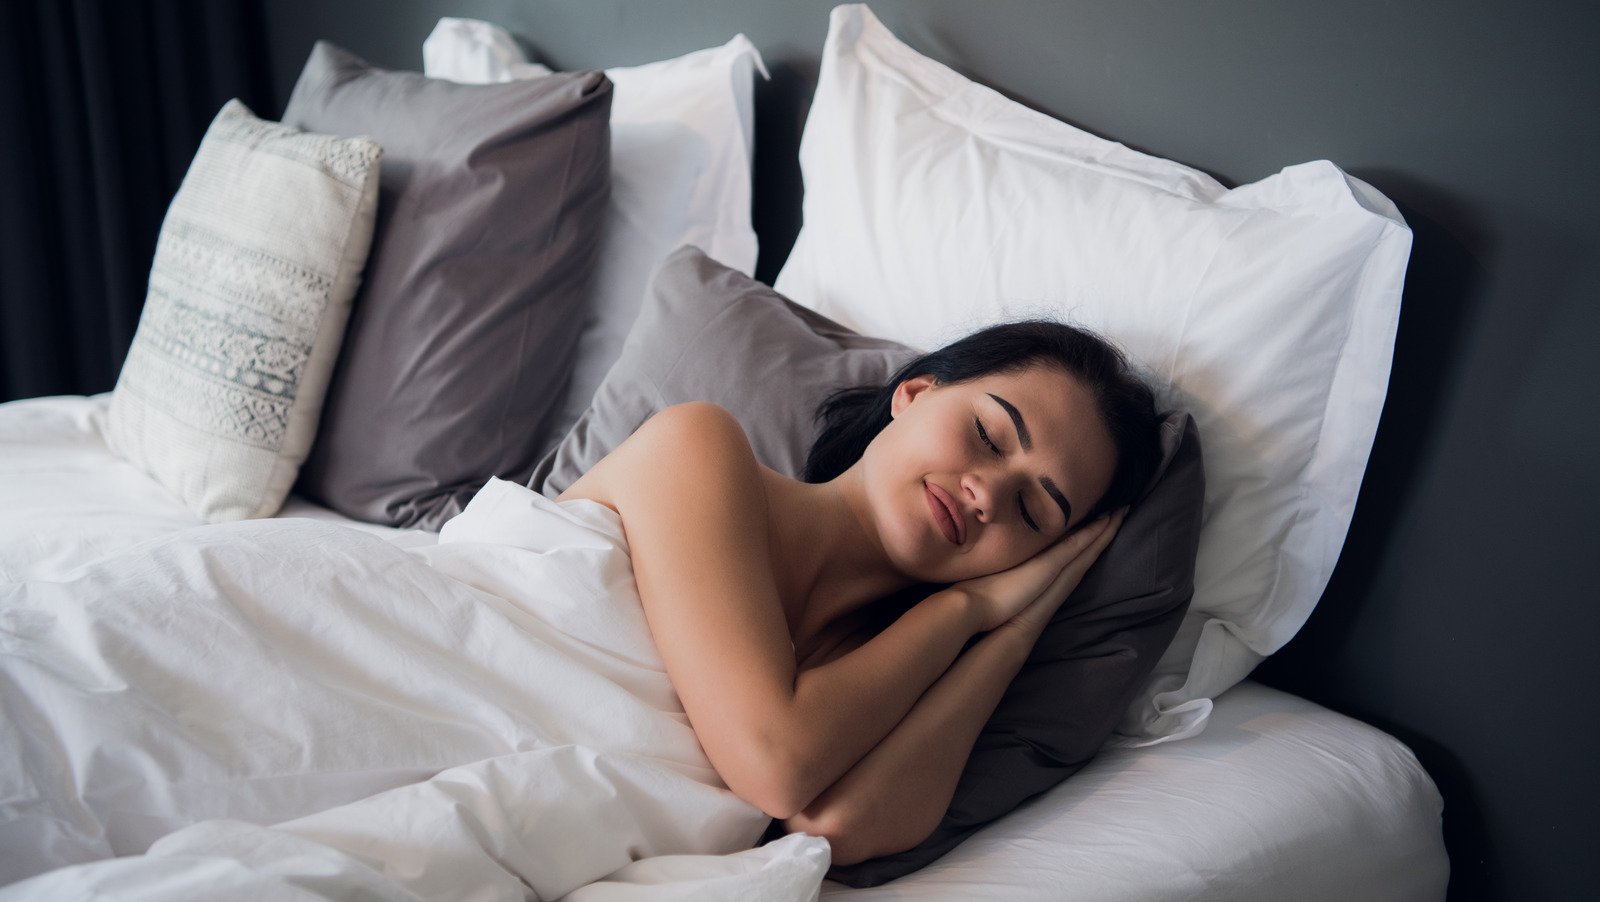 Bedding Materials To Avoid For A Better Night's Sleep